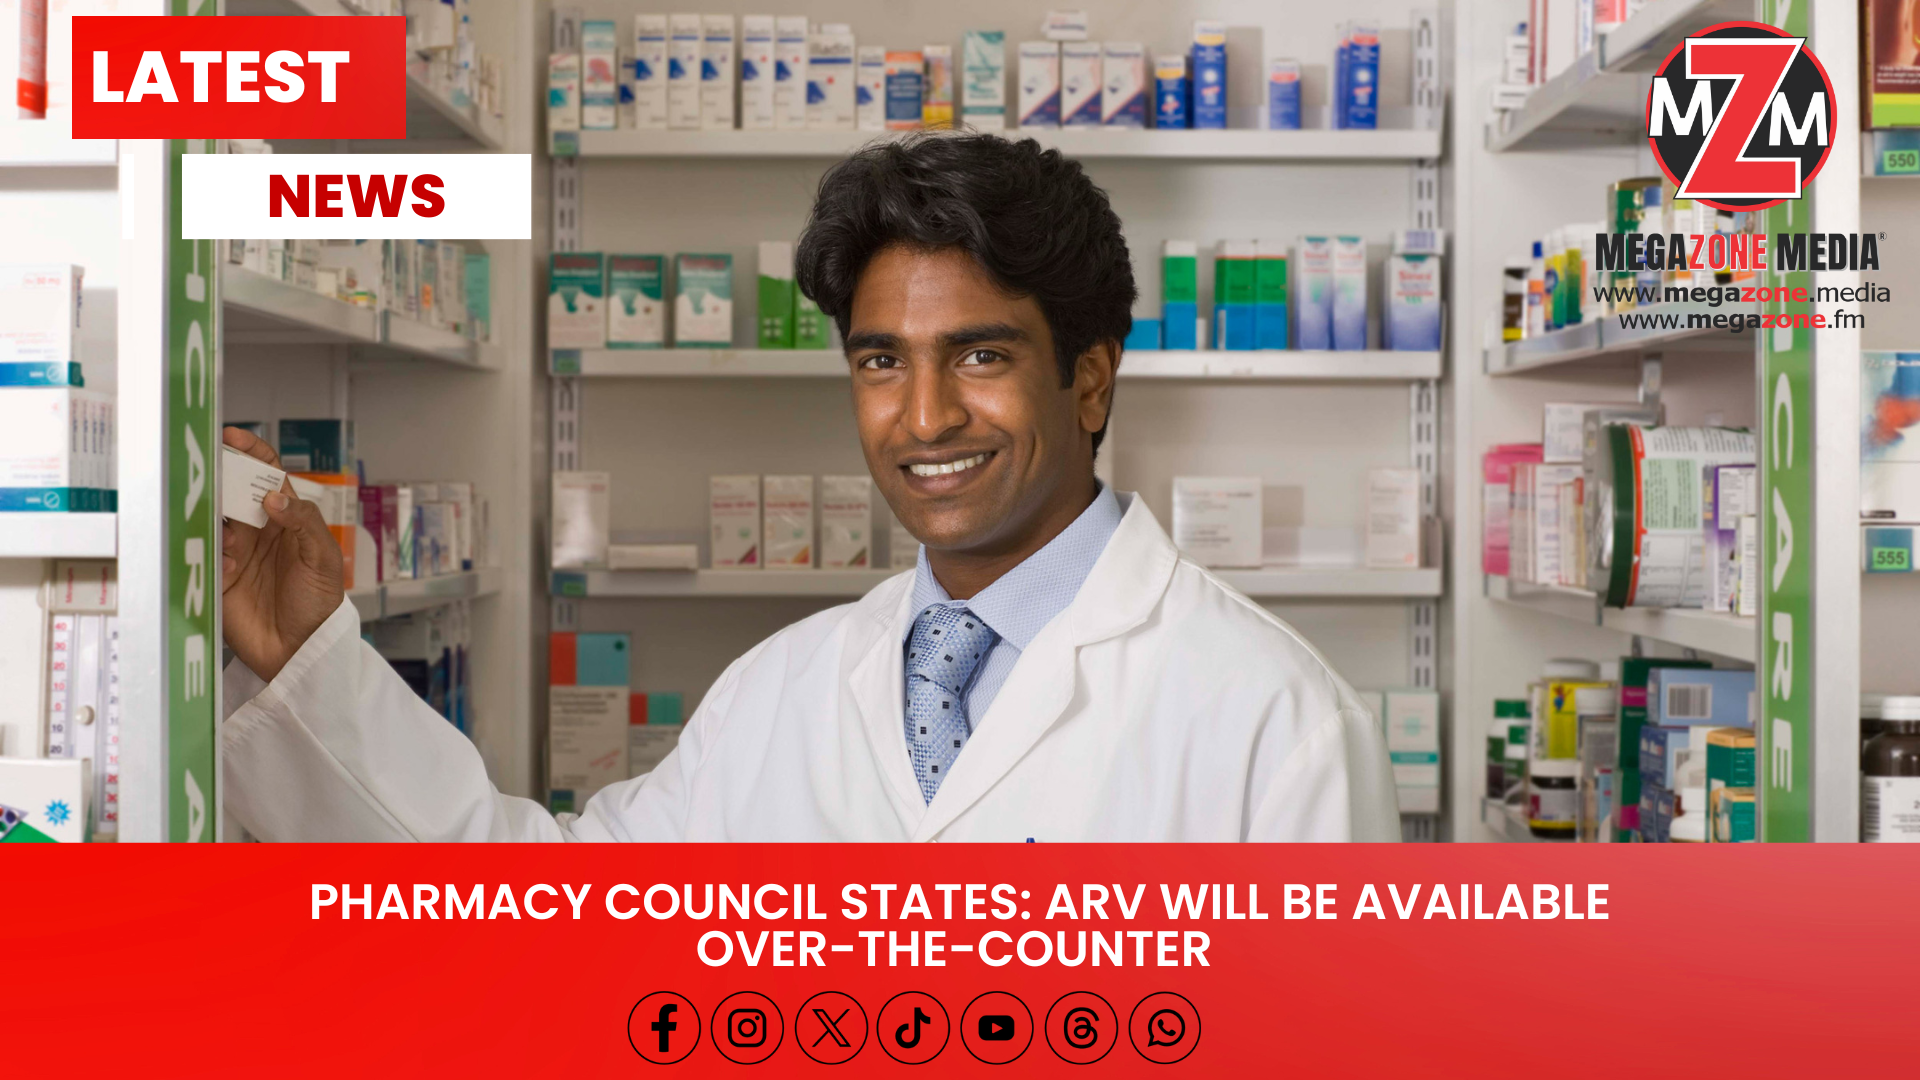 LATEST NEWS: Pharmacy Council states: ARV will be available over-the-counter